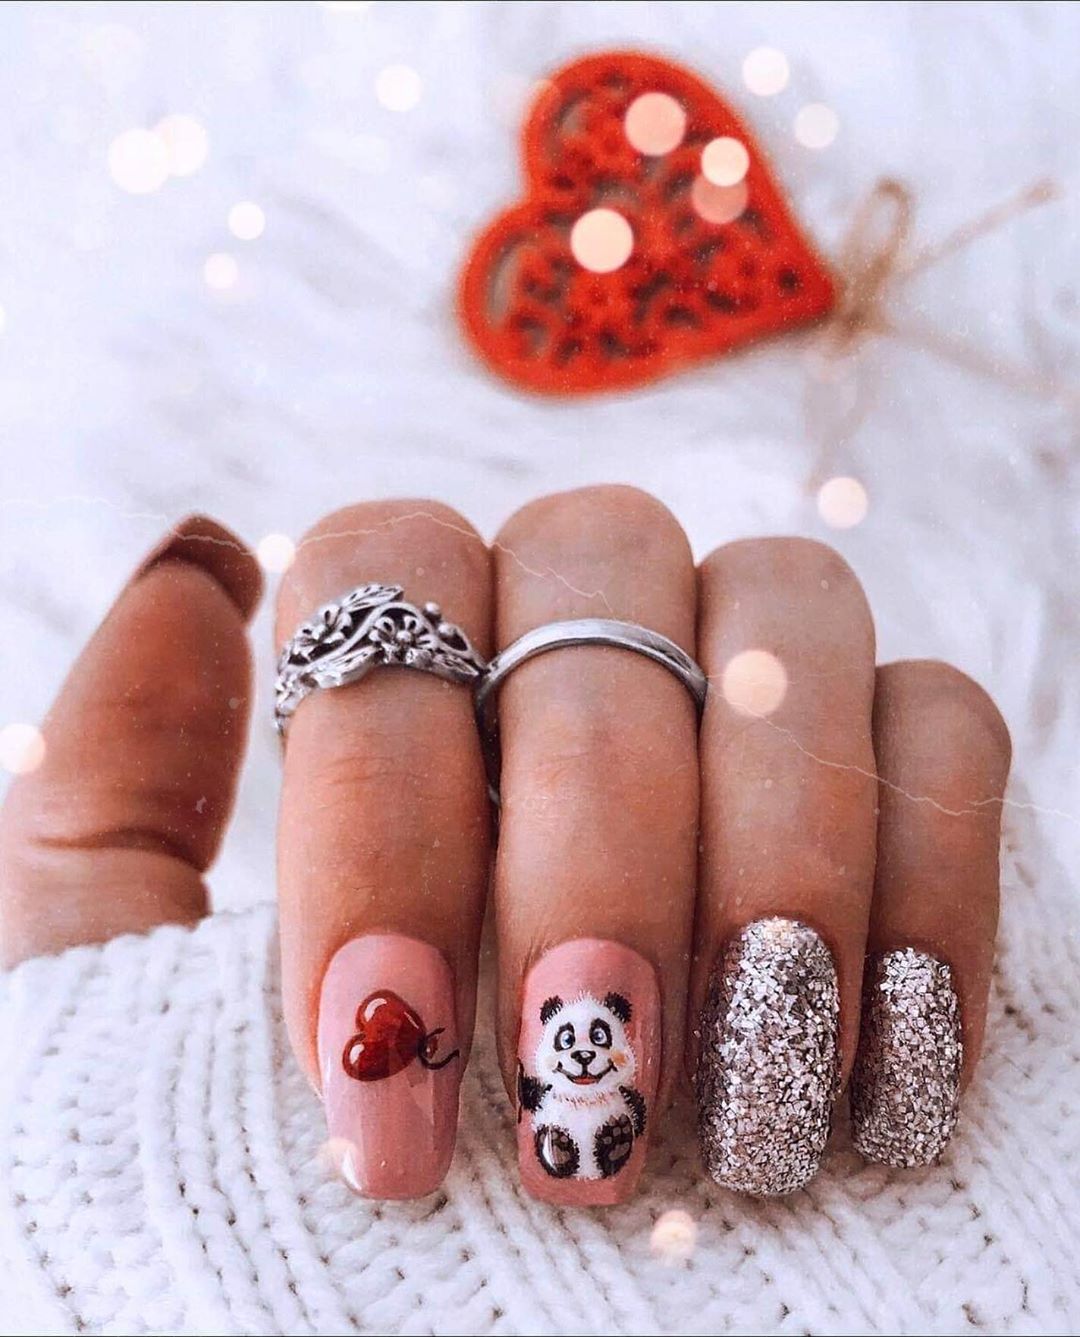 In Pursuit of Polish: Sail Away with Panda Nails